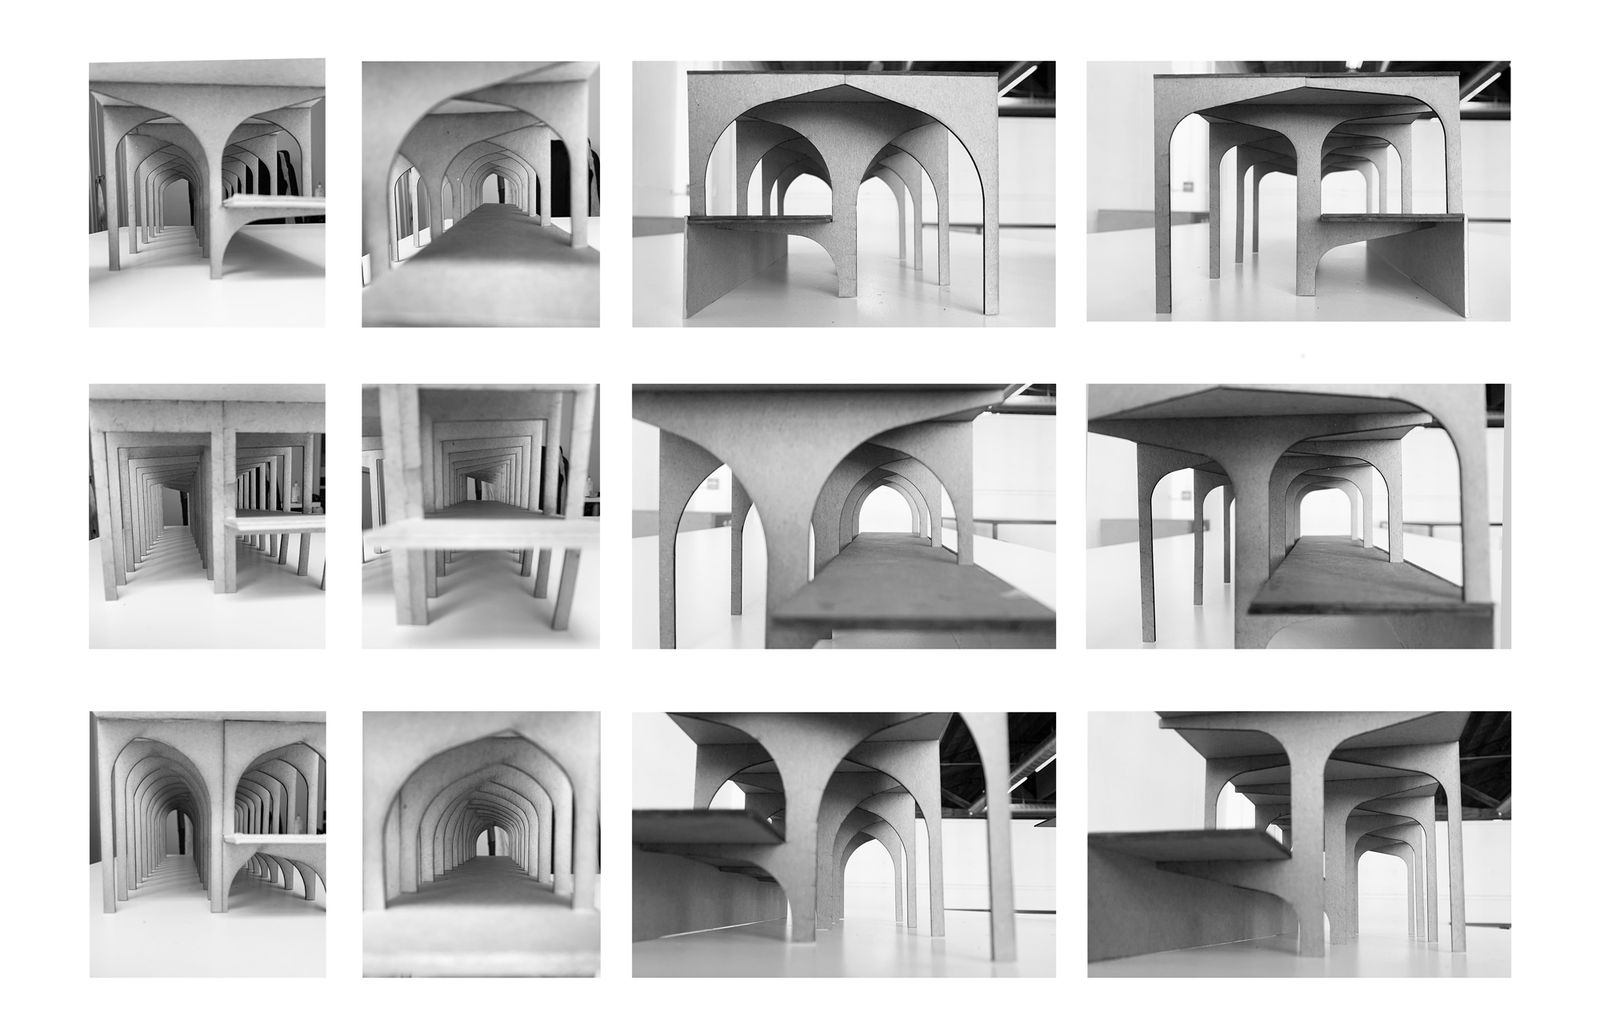 Structural CLT Arch Study Models